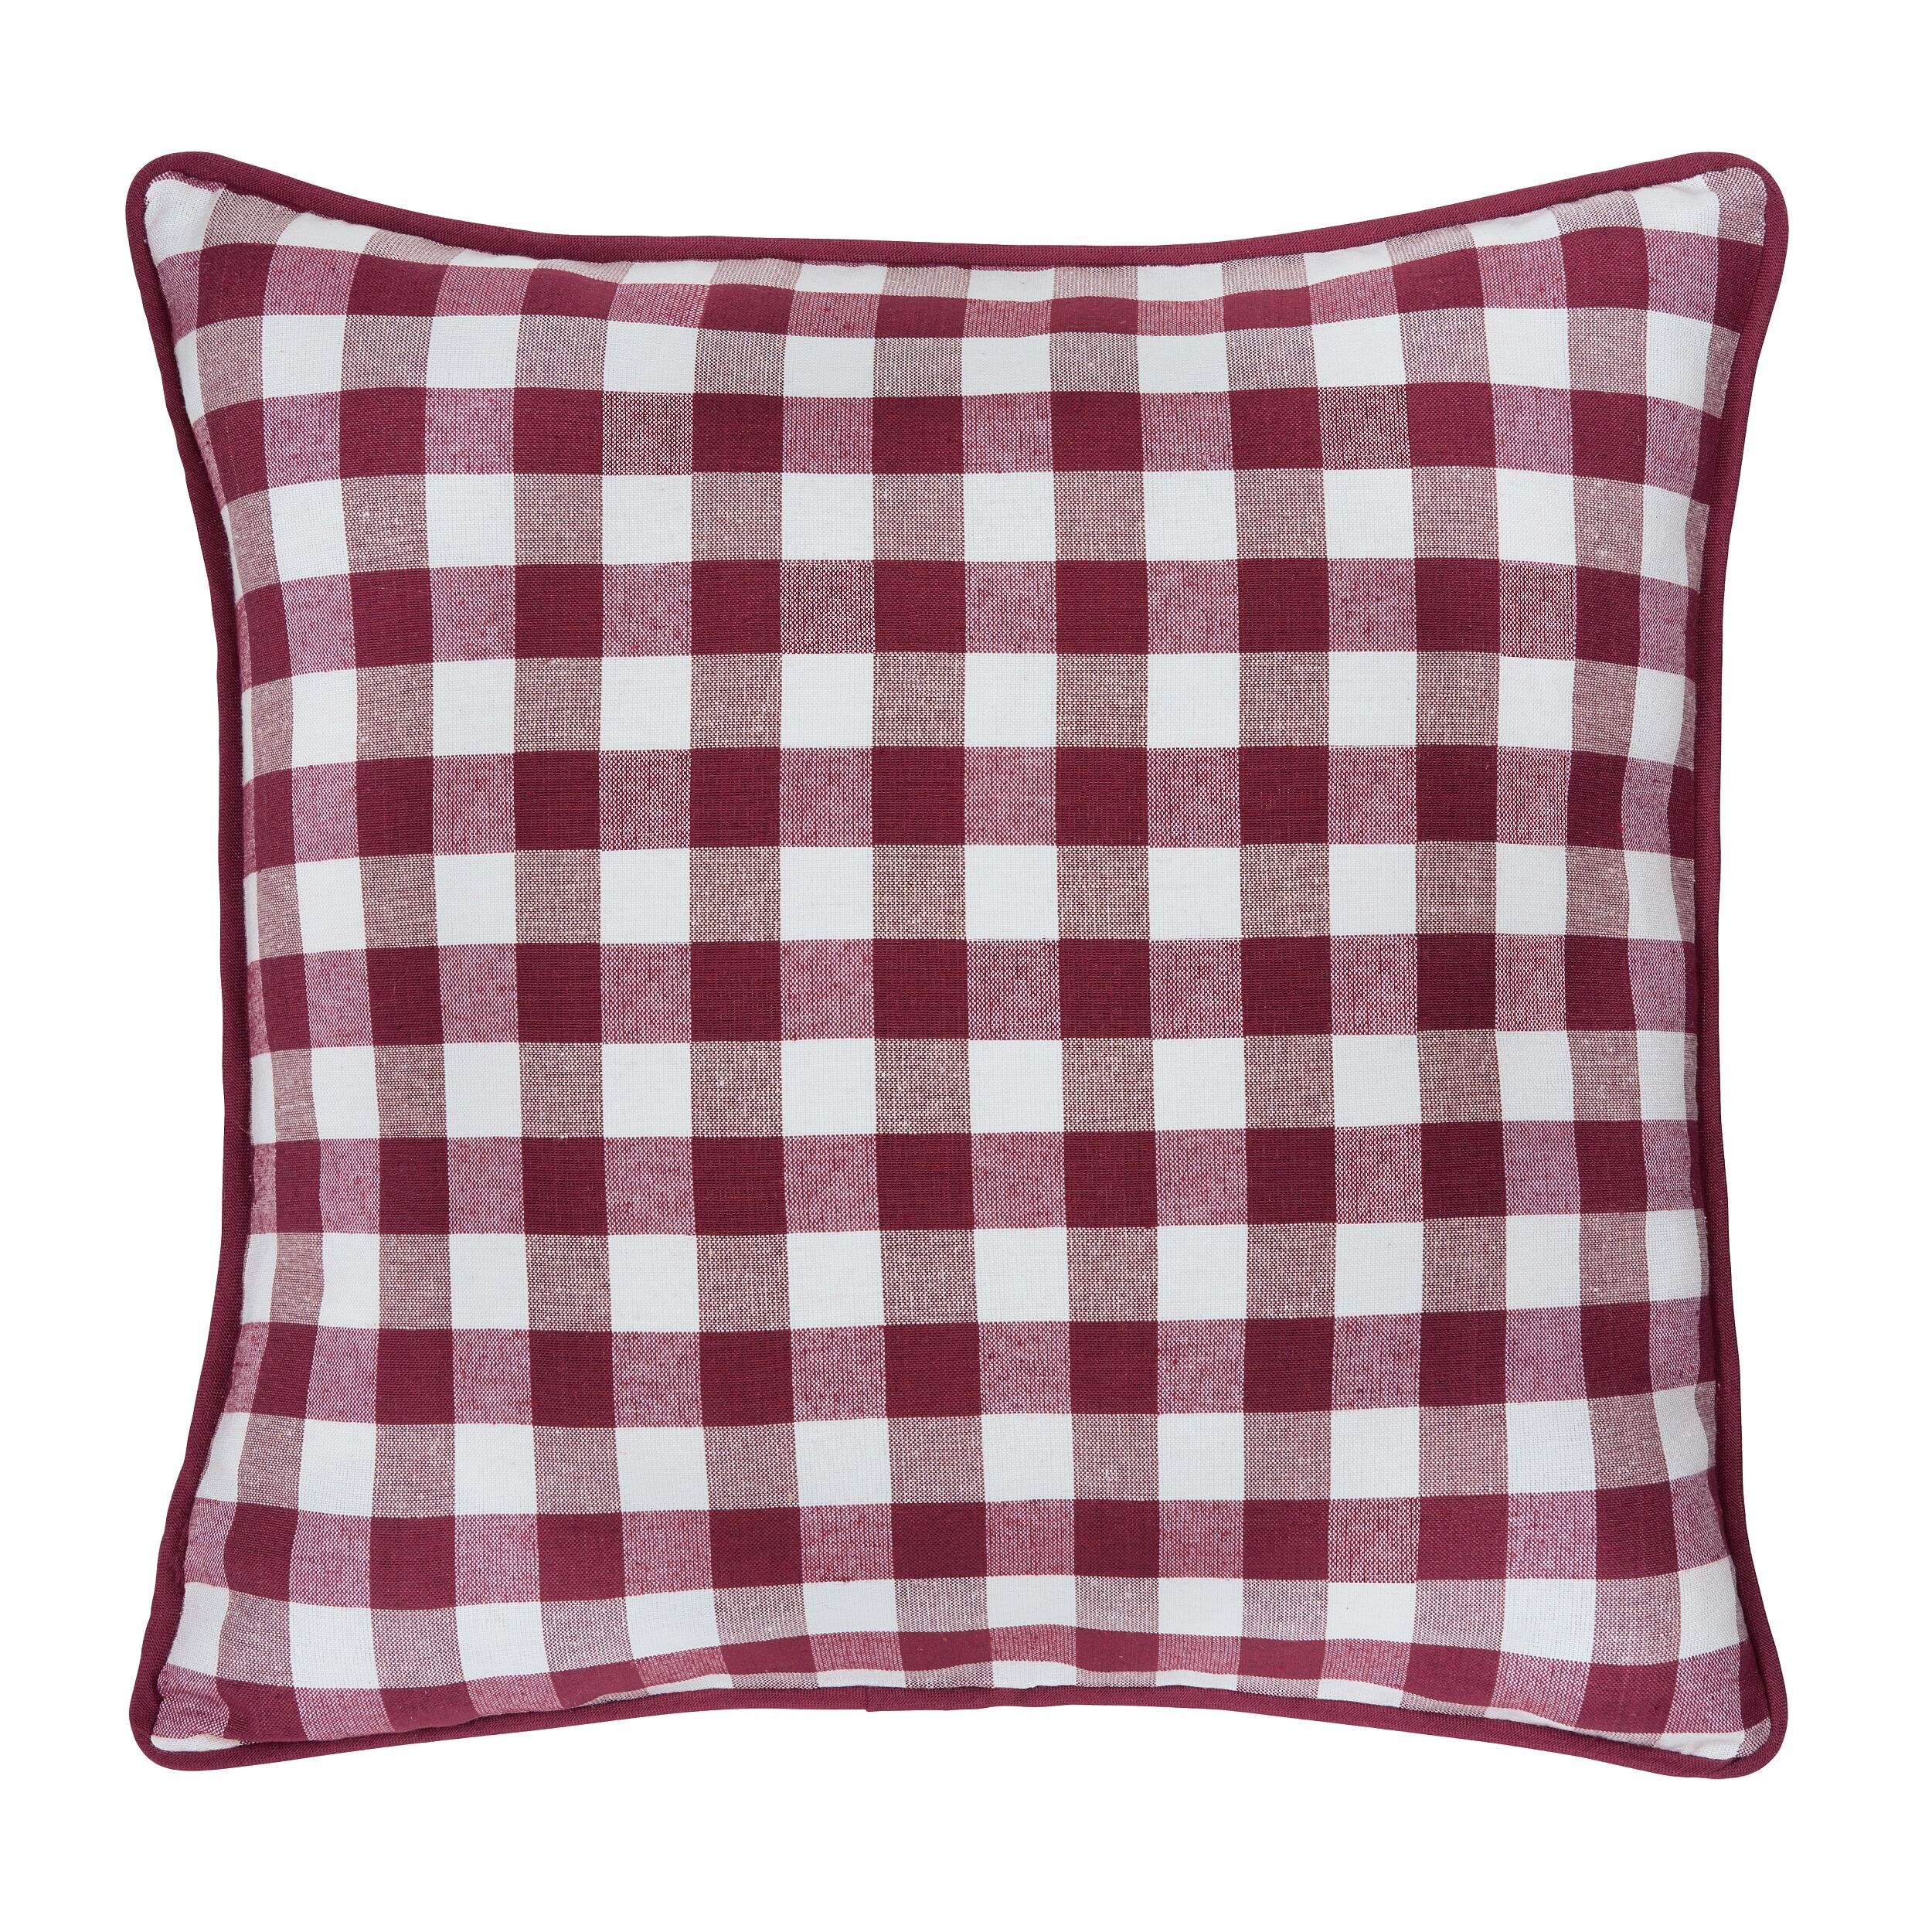 https://ak1.ostkcdn.com/images/products/is/images/direct/dc124ee99afef8f8aaf165f730441ecd523fe77d/Buffalo-Check-Throw-Pillow-Covers.jpg